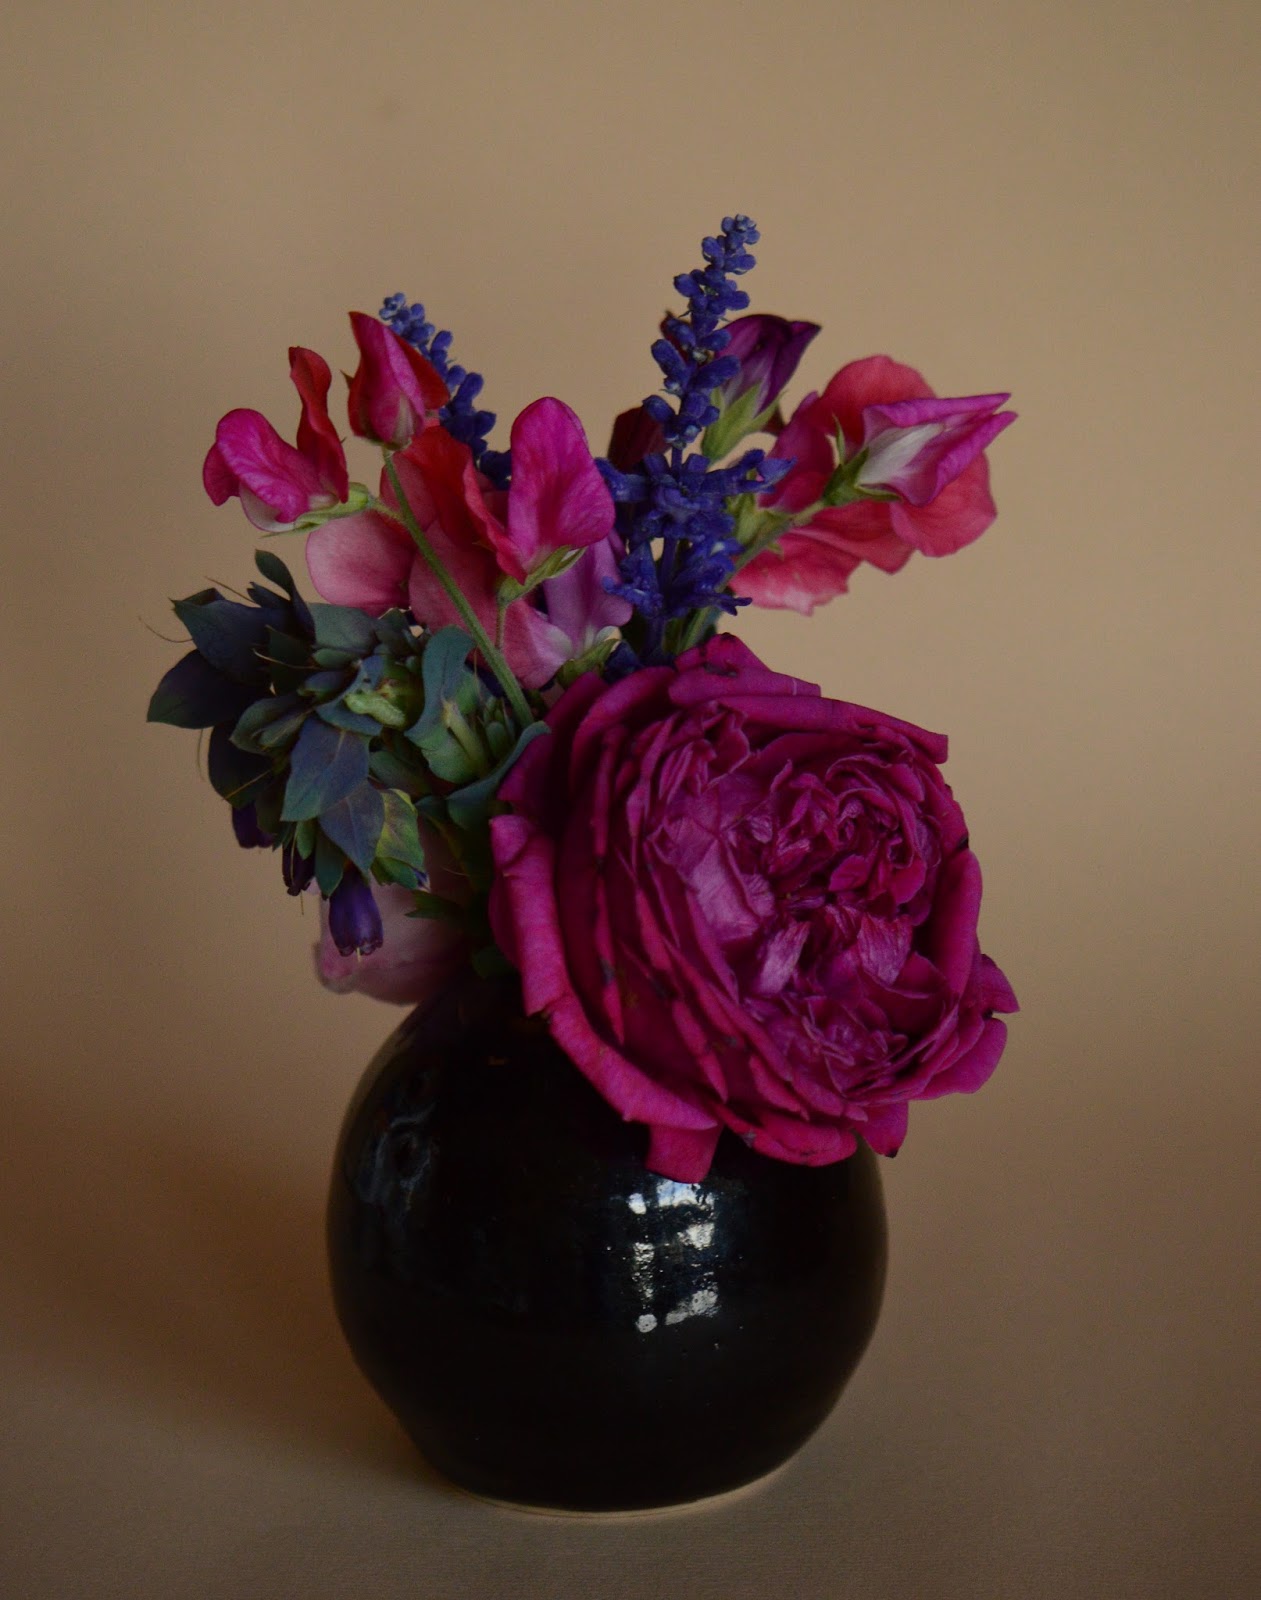 A Small Sunny Garden In A Vase Roses And Sweet Peas